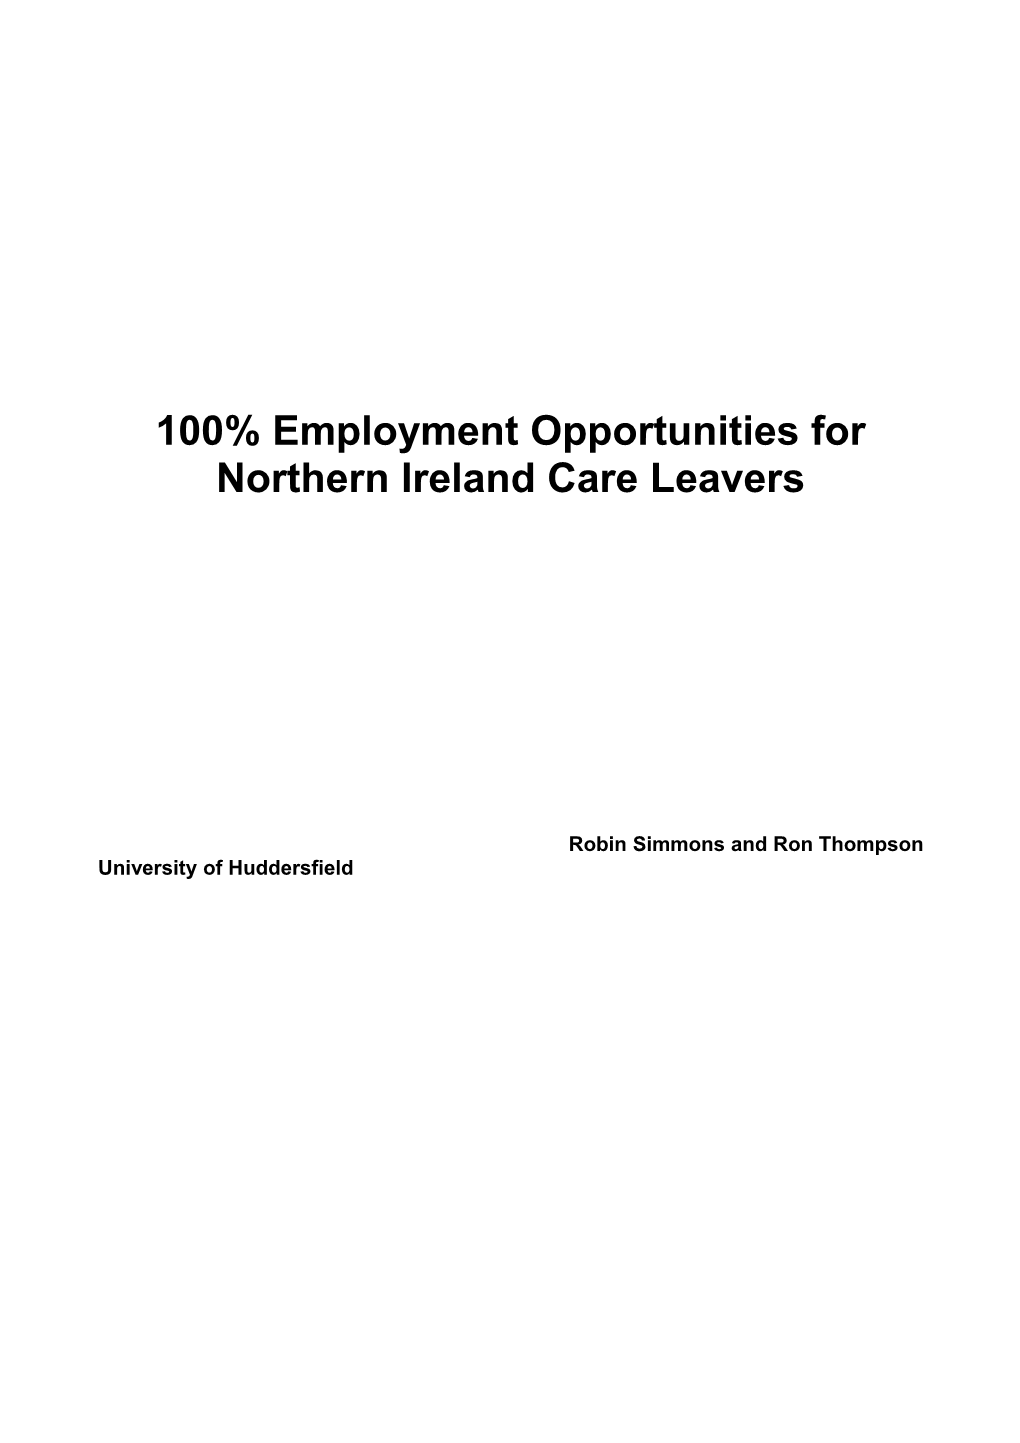 100% Employment Opportunities for Northern Ireland Care Leavers